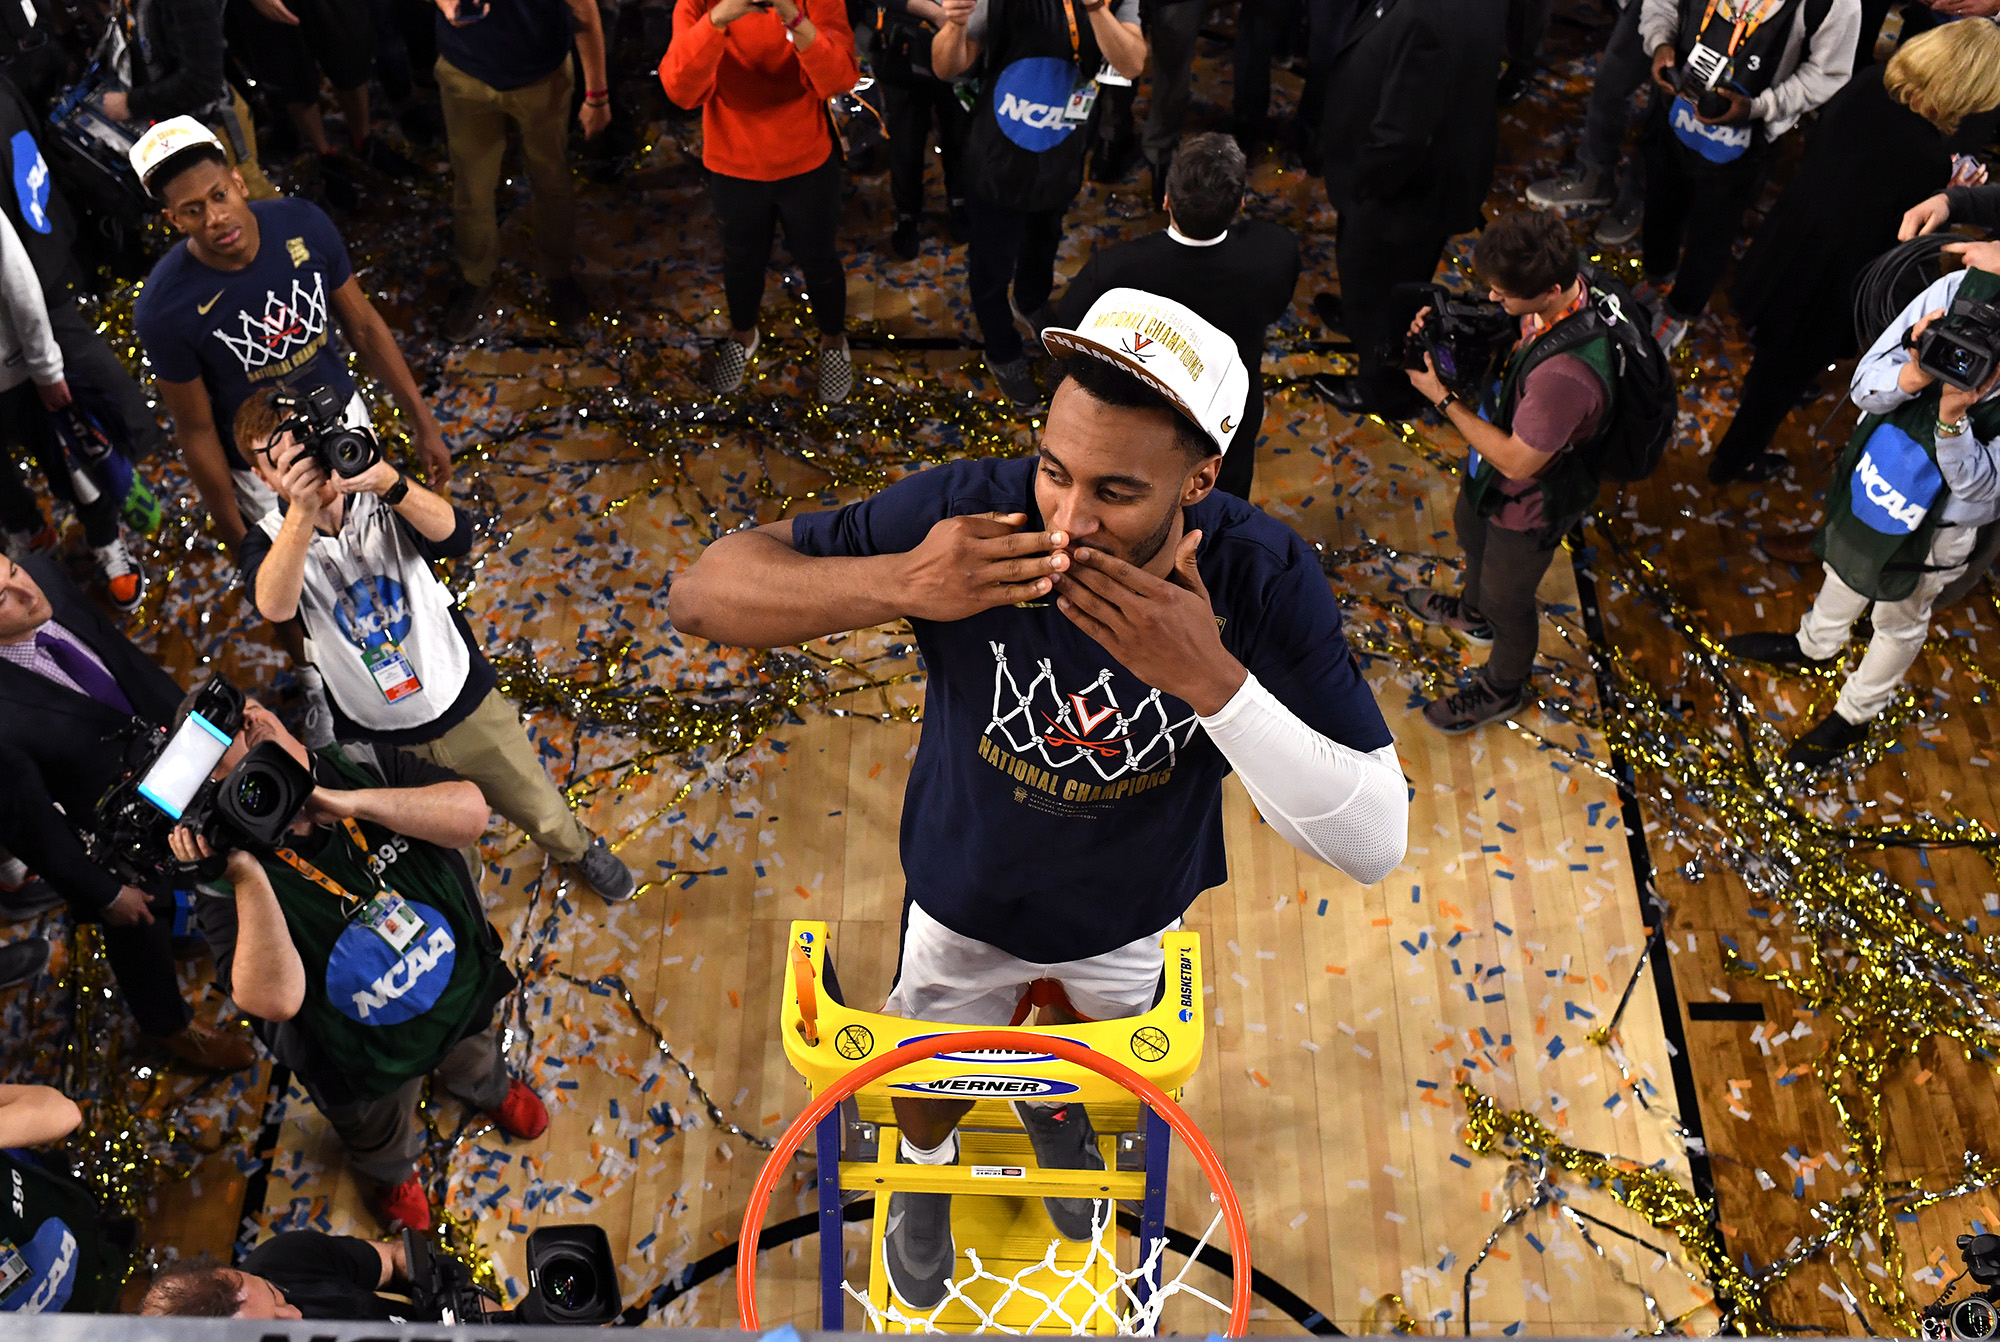 Braxton Key&nbsp;of the Virginia Cavaliers cuts the net down after his teams 85-77 win over the Texas Tech Red Raiders in the 2019 NCAA men's Final Four National Championship game in Minneapolis, Minnesota on April 8, 2019.